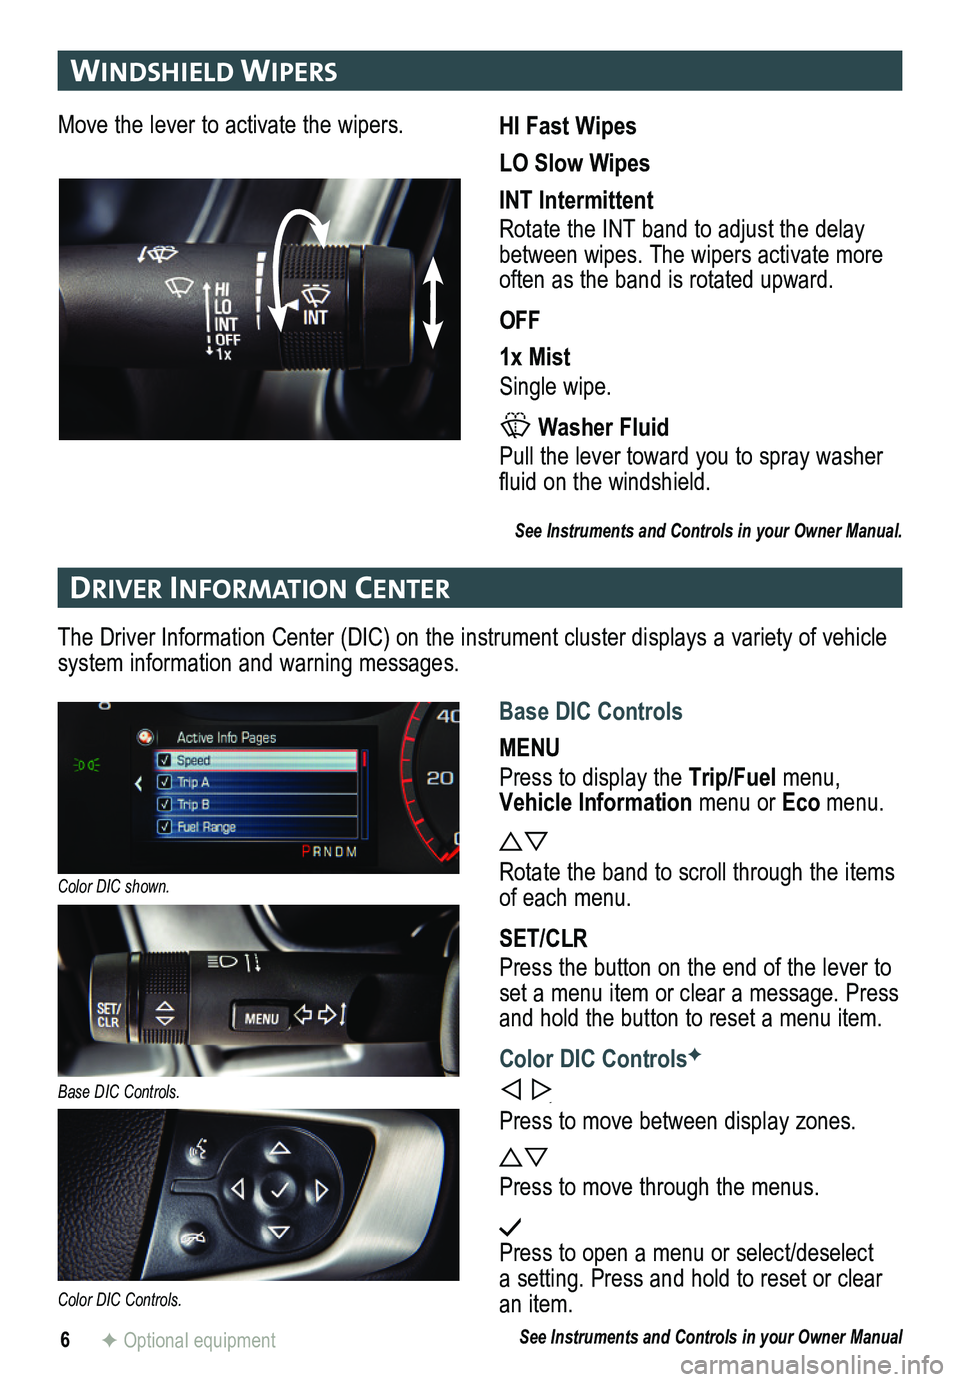 GMC CANYON 2015  Get To Know Guide 6
drIver In Format Ion center
WIndsh Ield WIPers
F Optional equipment
The Driver Information Center (DIC) on the instrument cluster displays a variety of vehicle system information and warning message